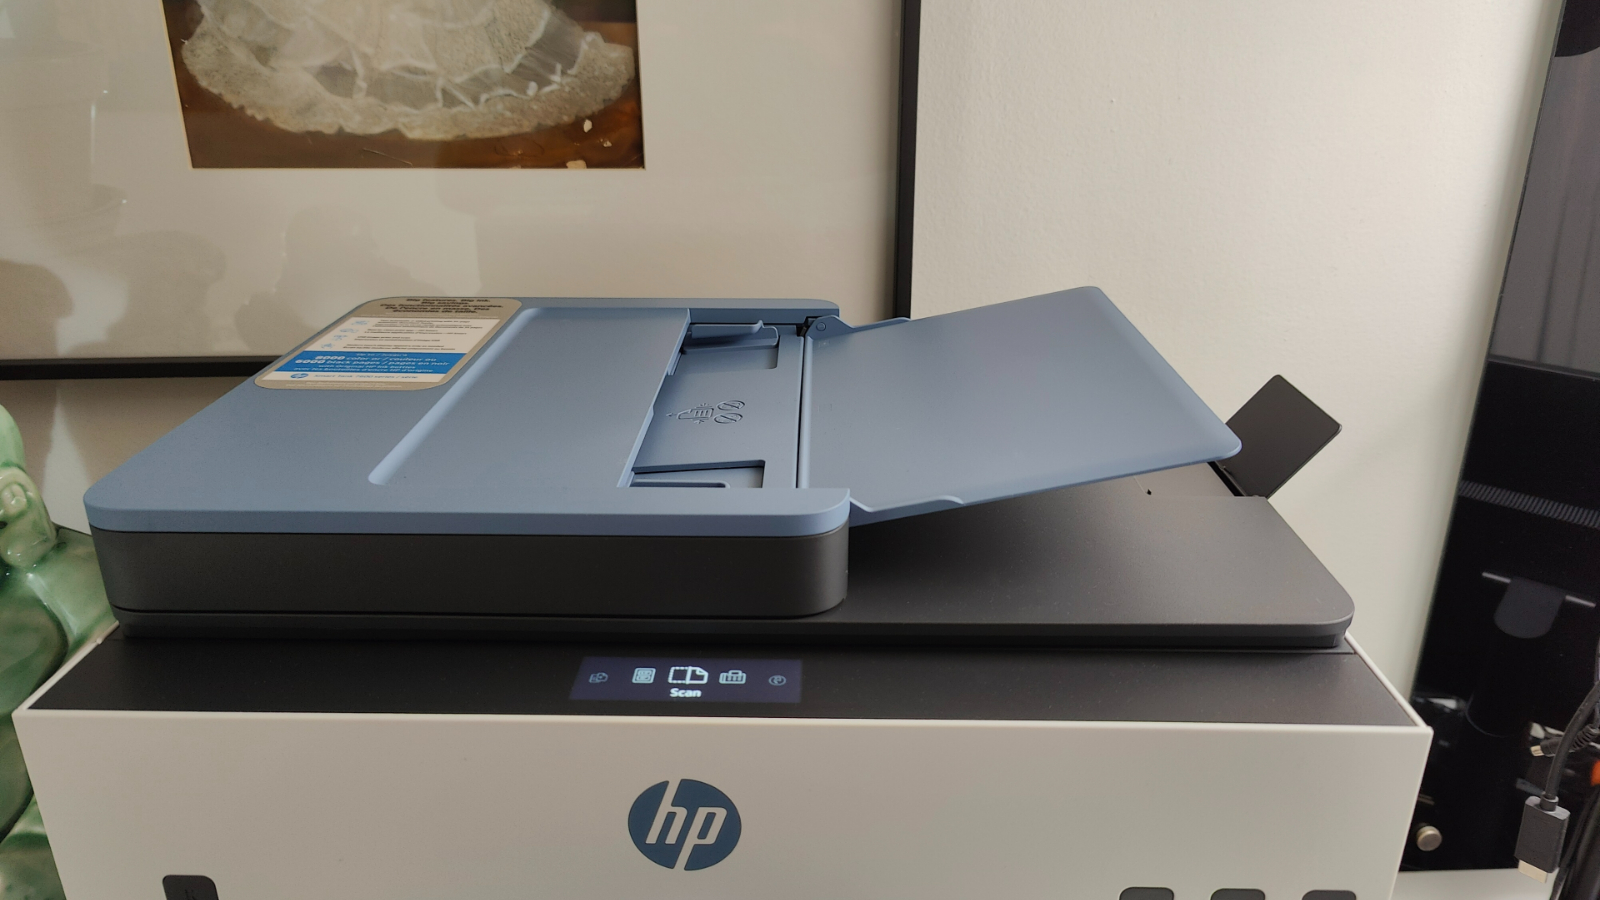 HP Smart Tank 7602 All-in-One Printer Review